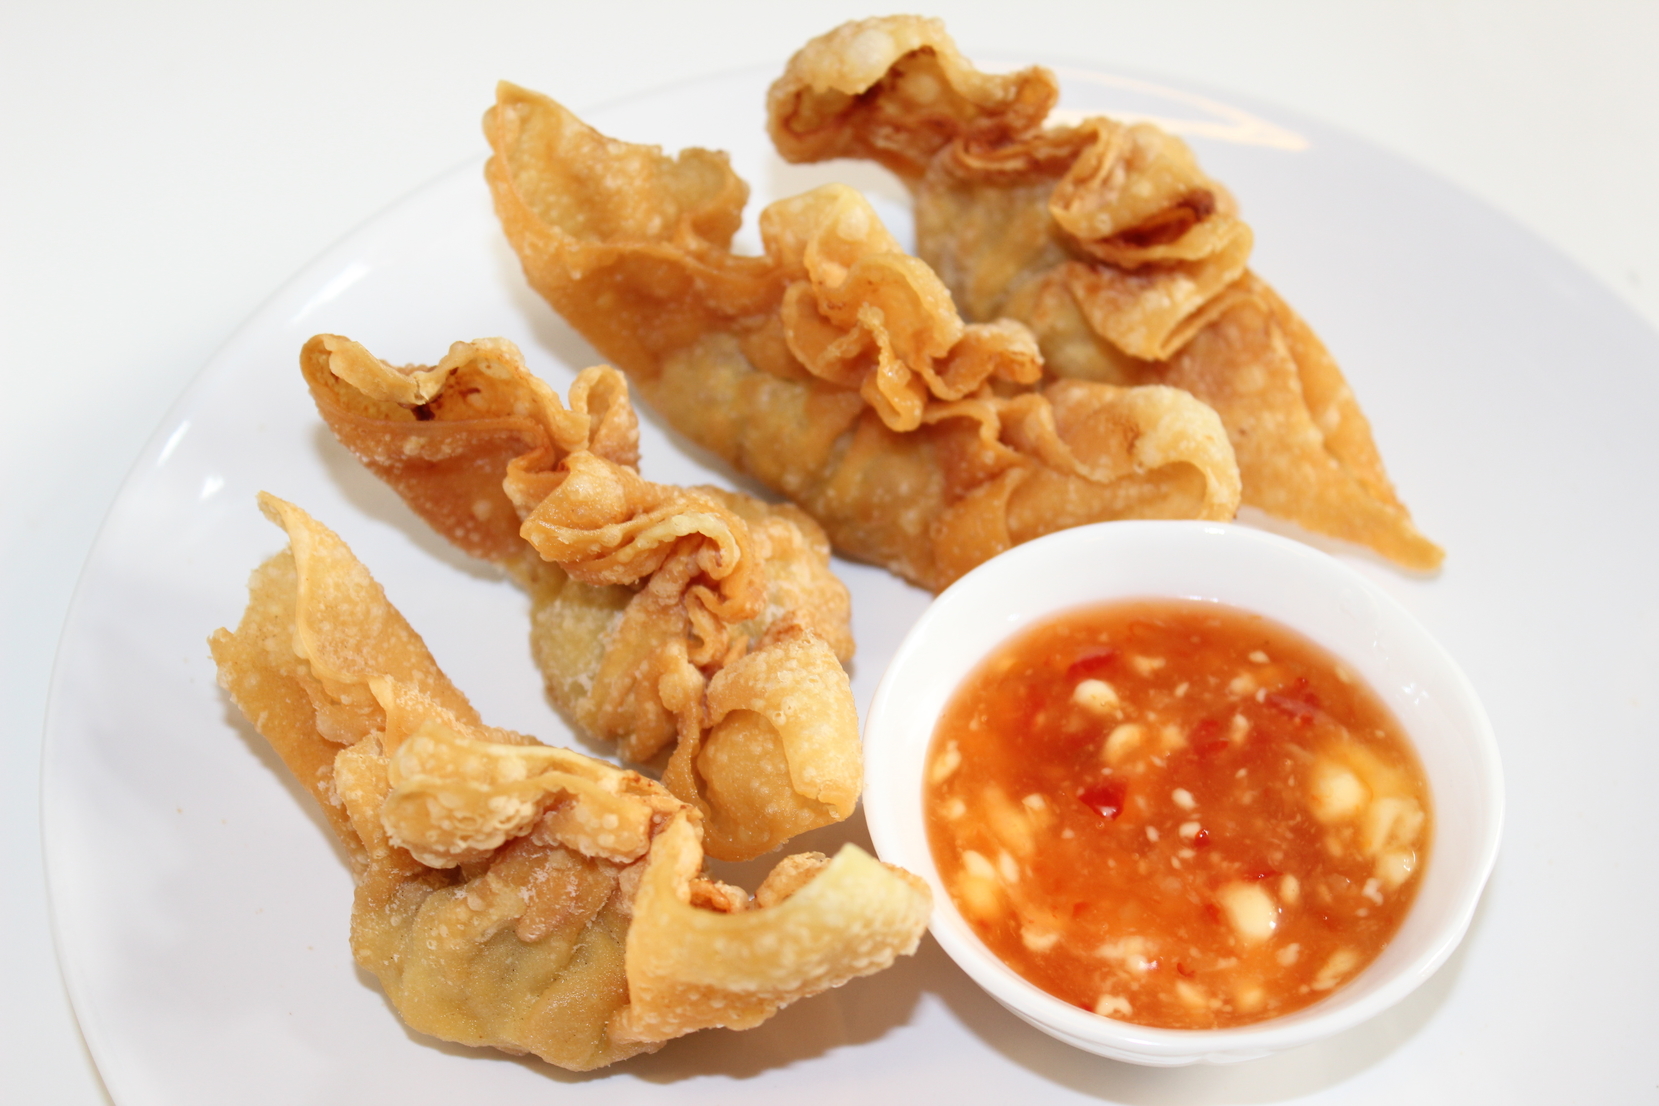 Number 9 on the Menu, Fried Wonton with Sweet chili mayonnaise